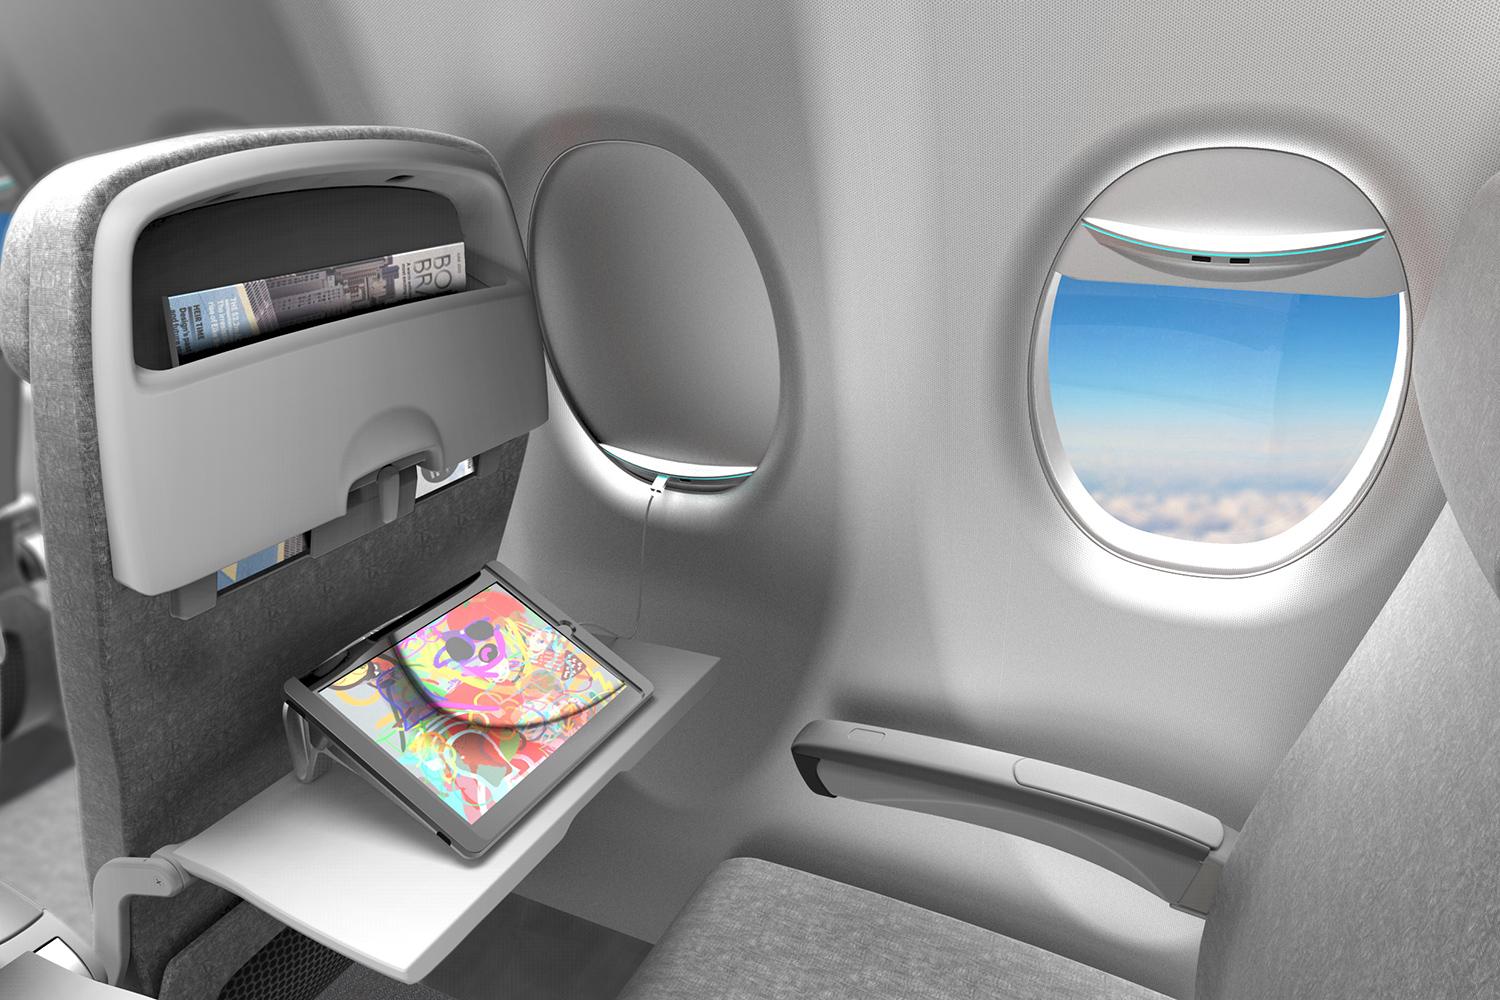 Best Airplane Interior Design Concepts for 2015